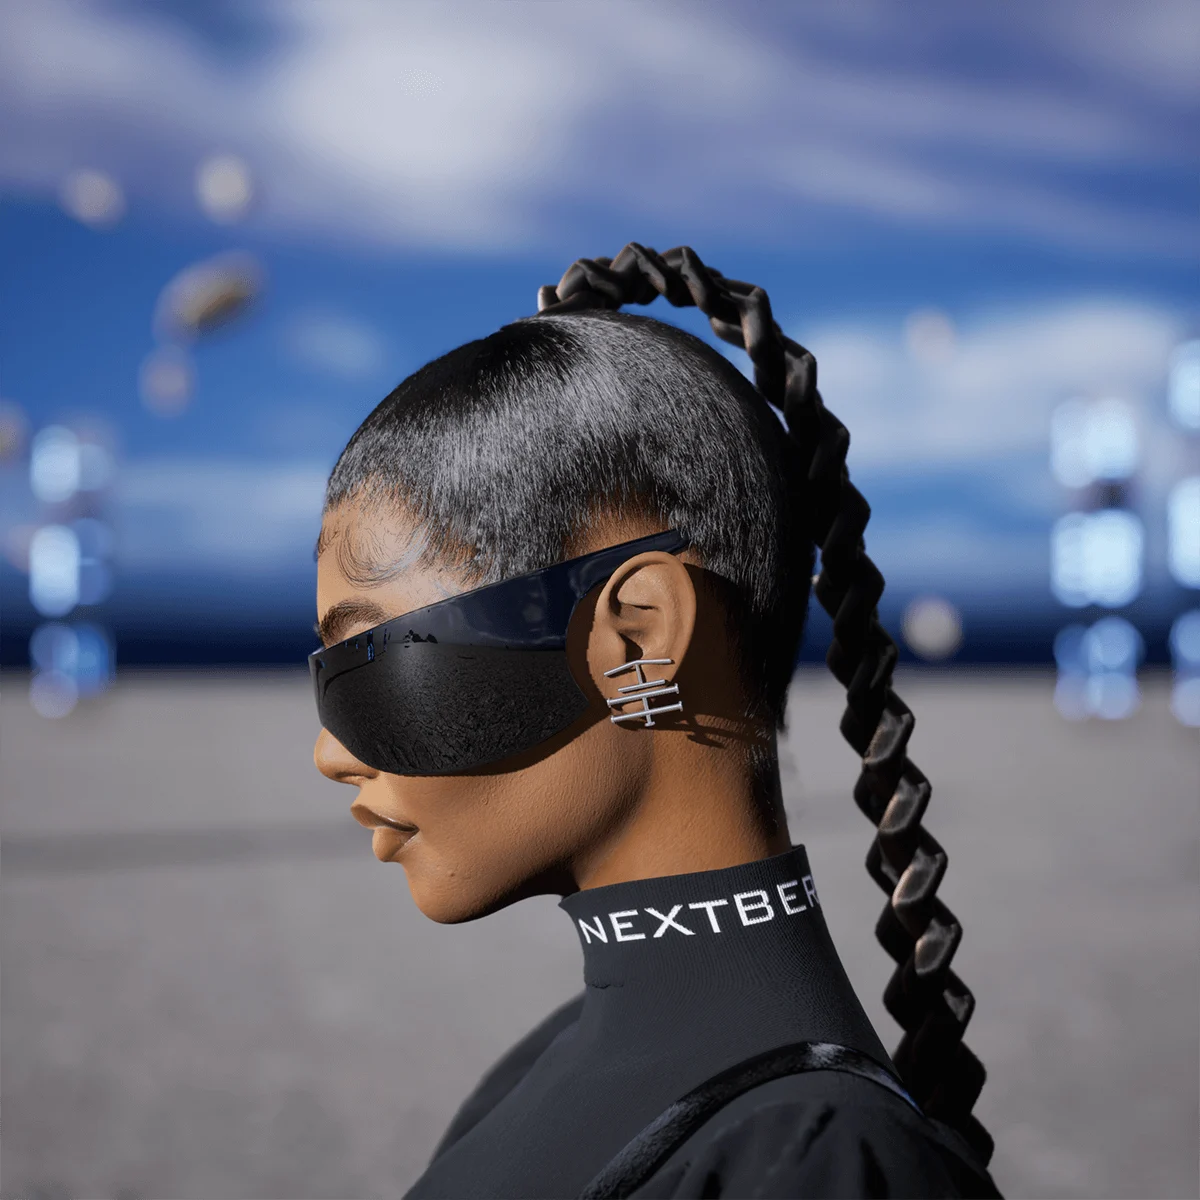 A digitally-rendered image of a side profile of a woman wearing an all-black outfit and black sunglasses, her hair tied into one very long braid.